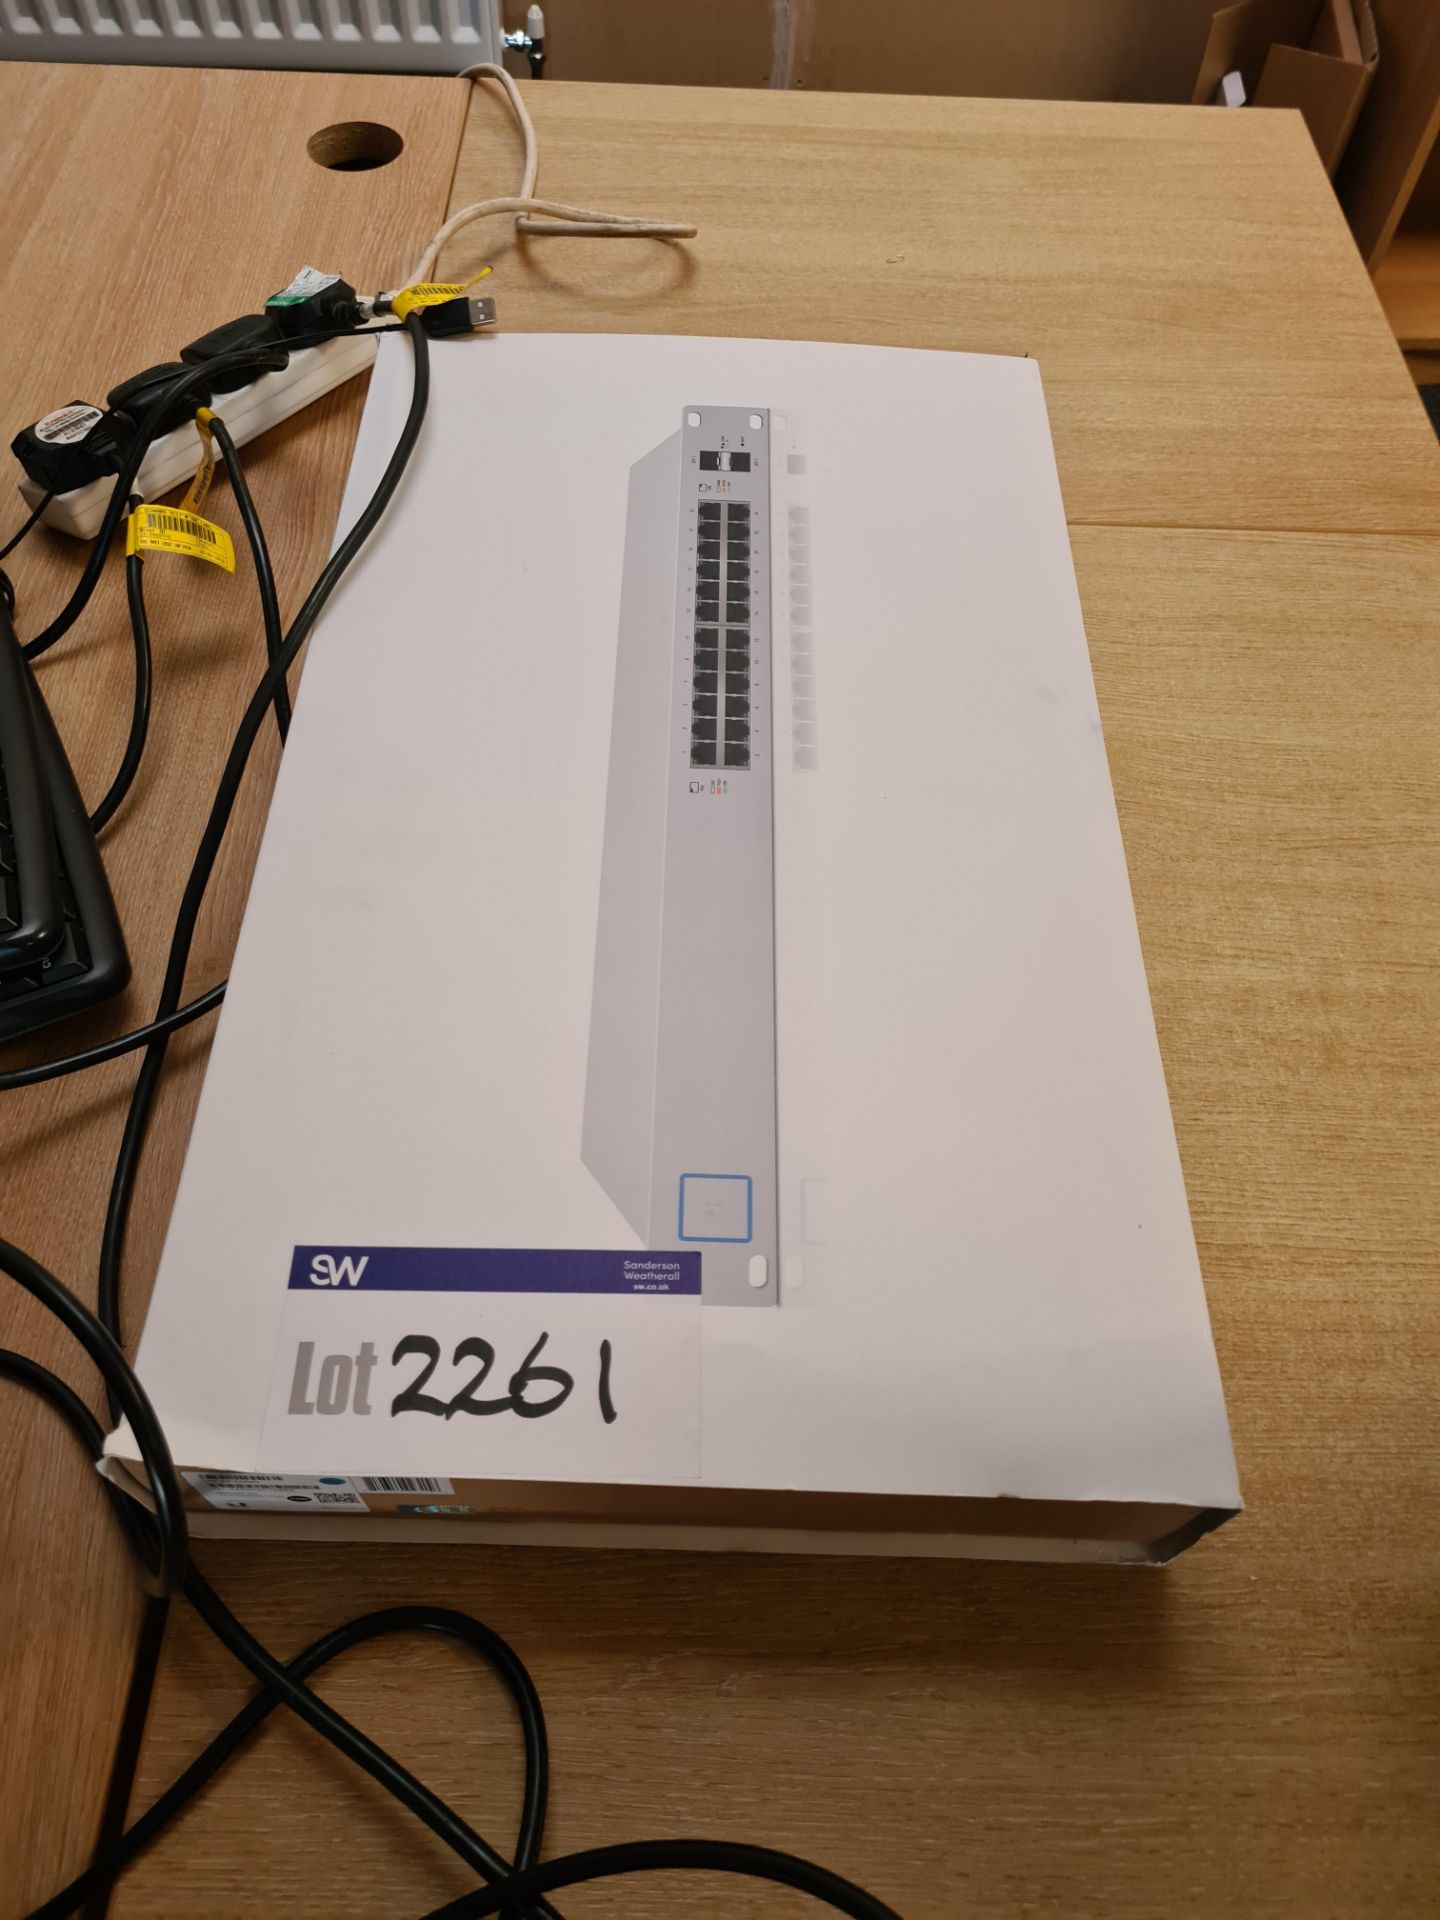 Unifi Switch 24 500W Managed PoE+ Gigabit Switch, with SFPPlease read the following important